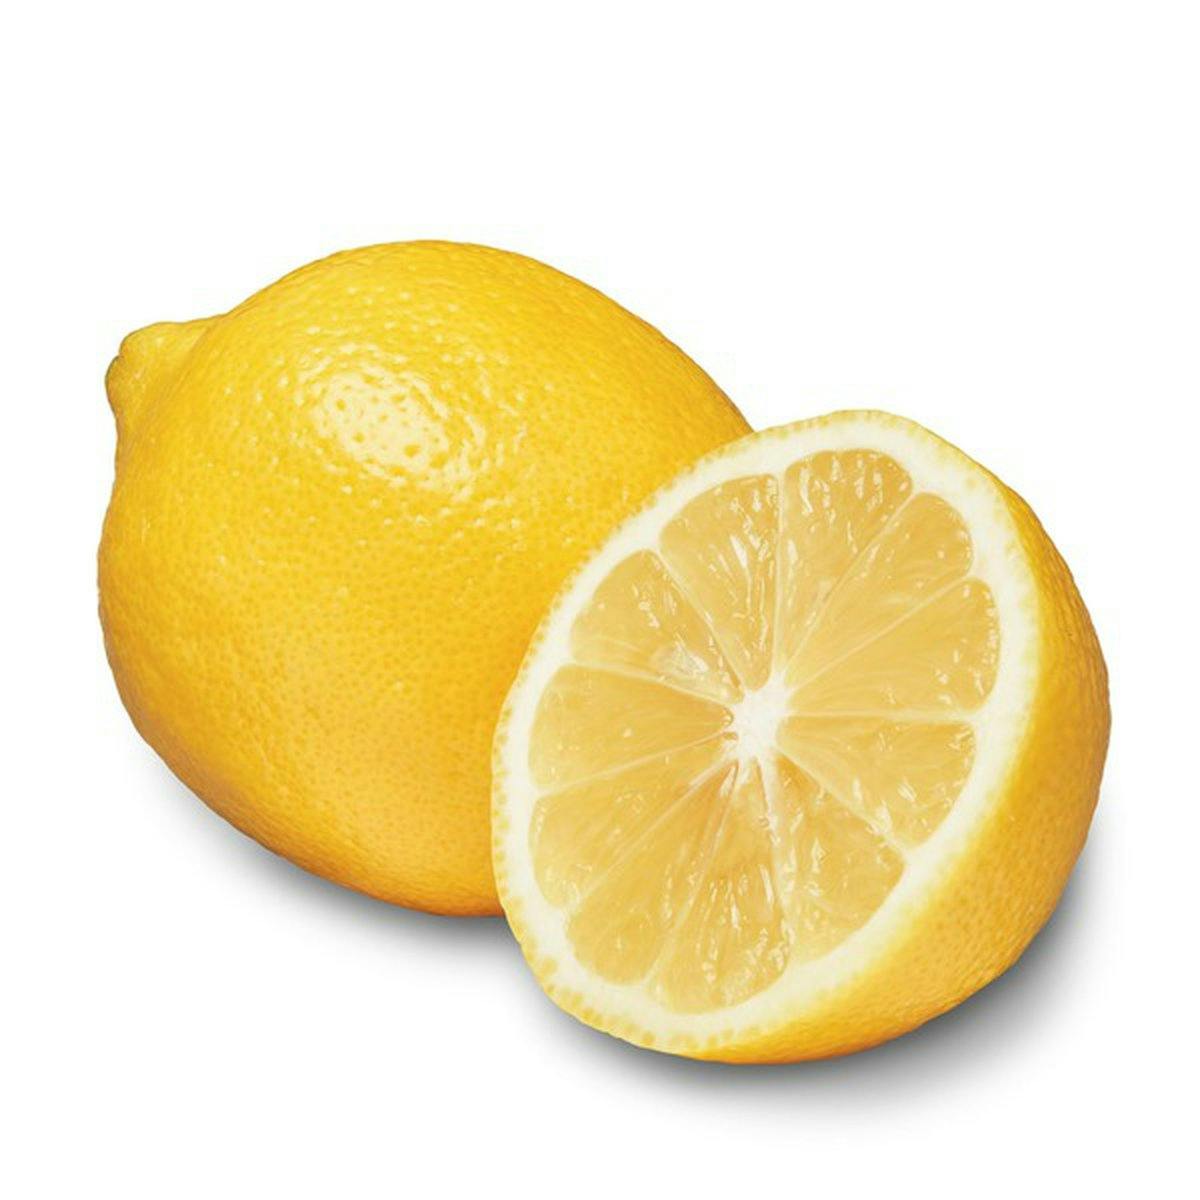 A little squeeze of lemon (to activate the baking soda)